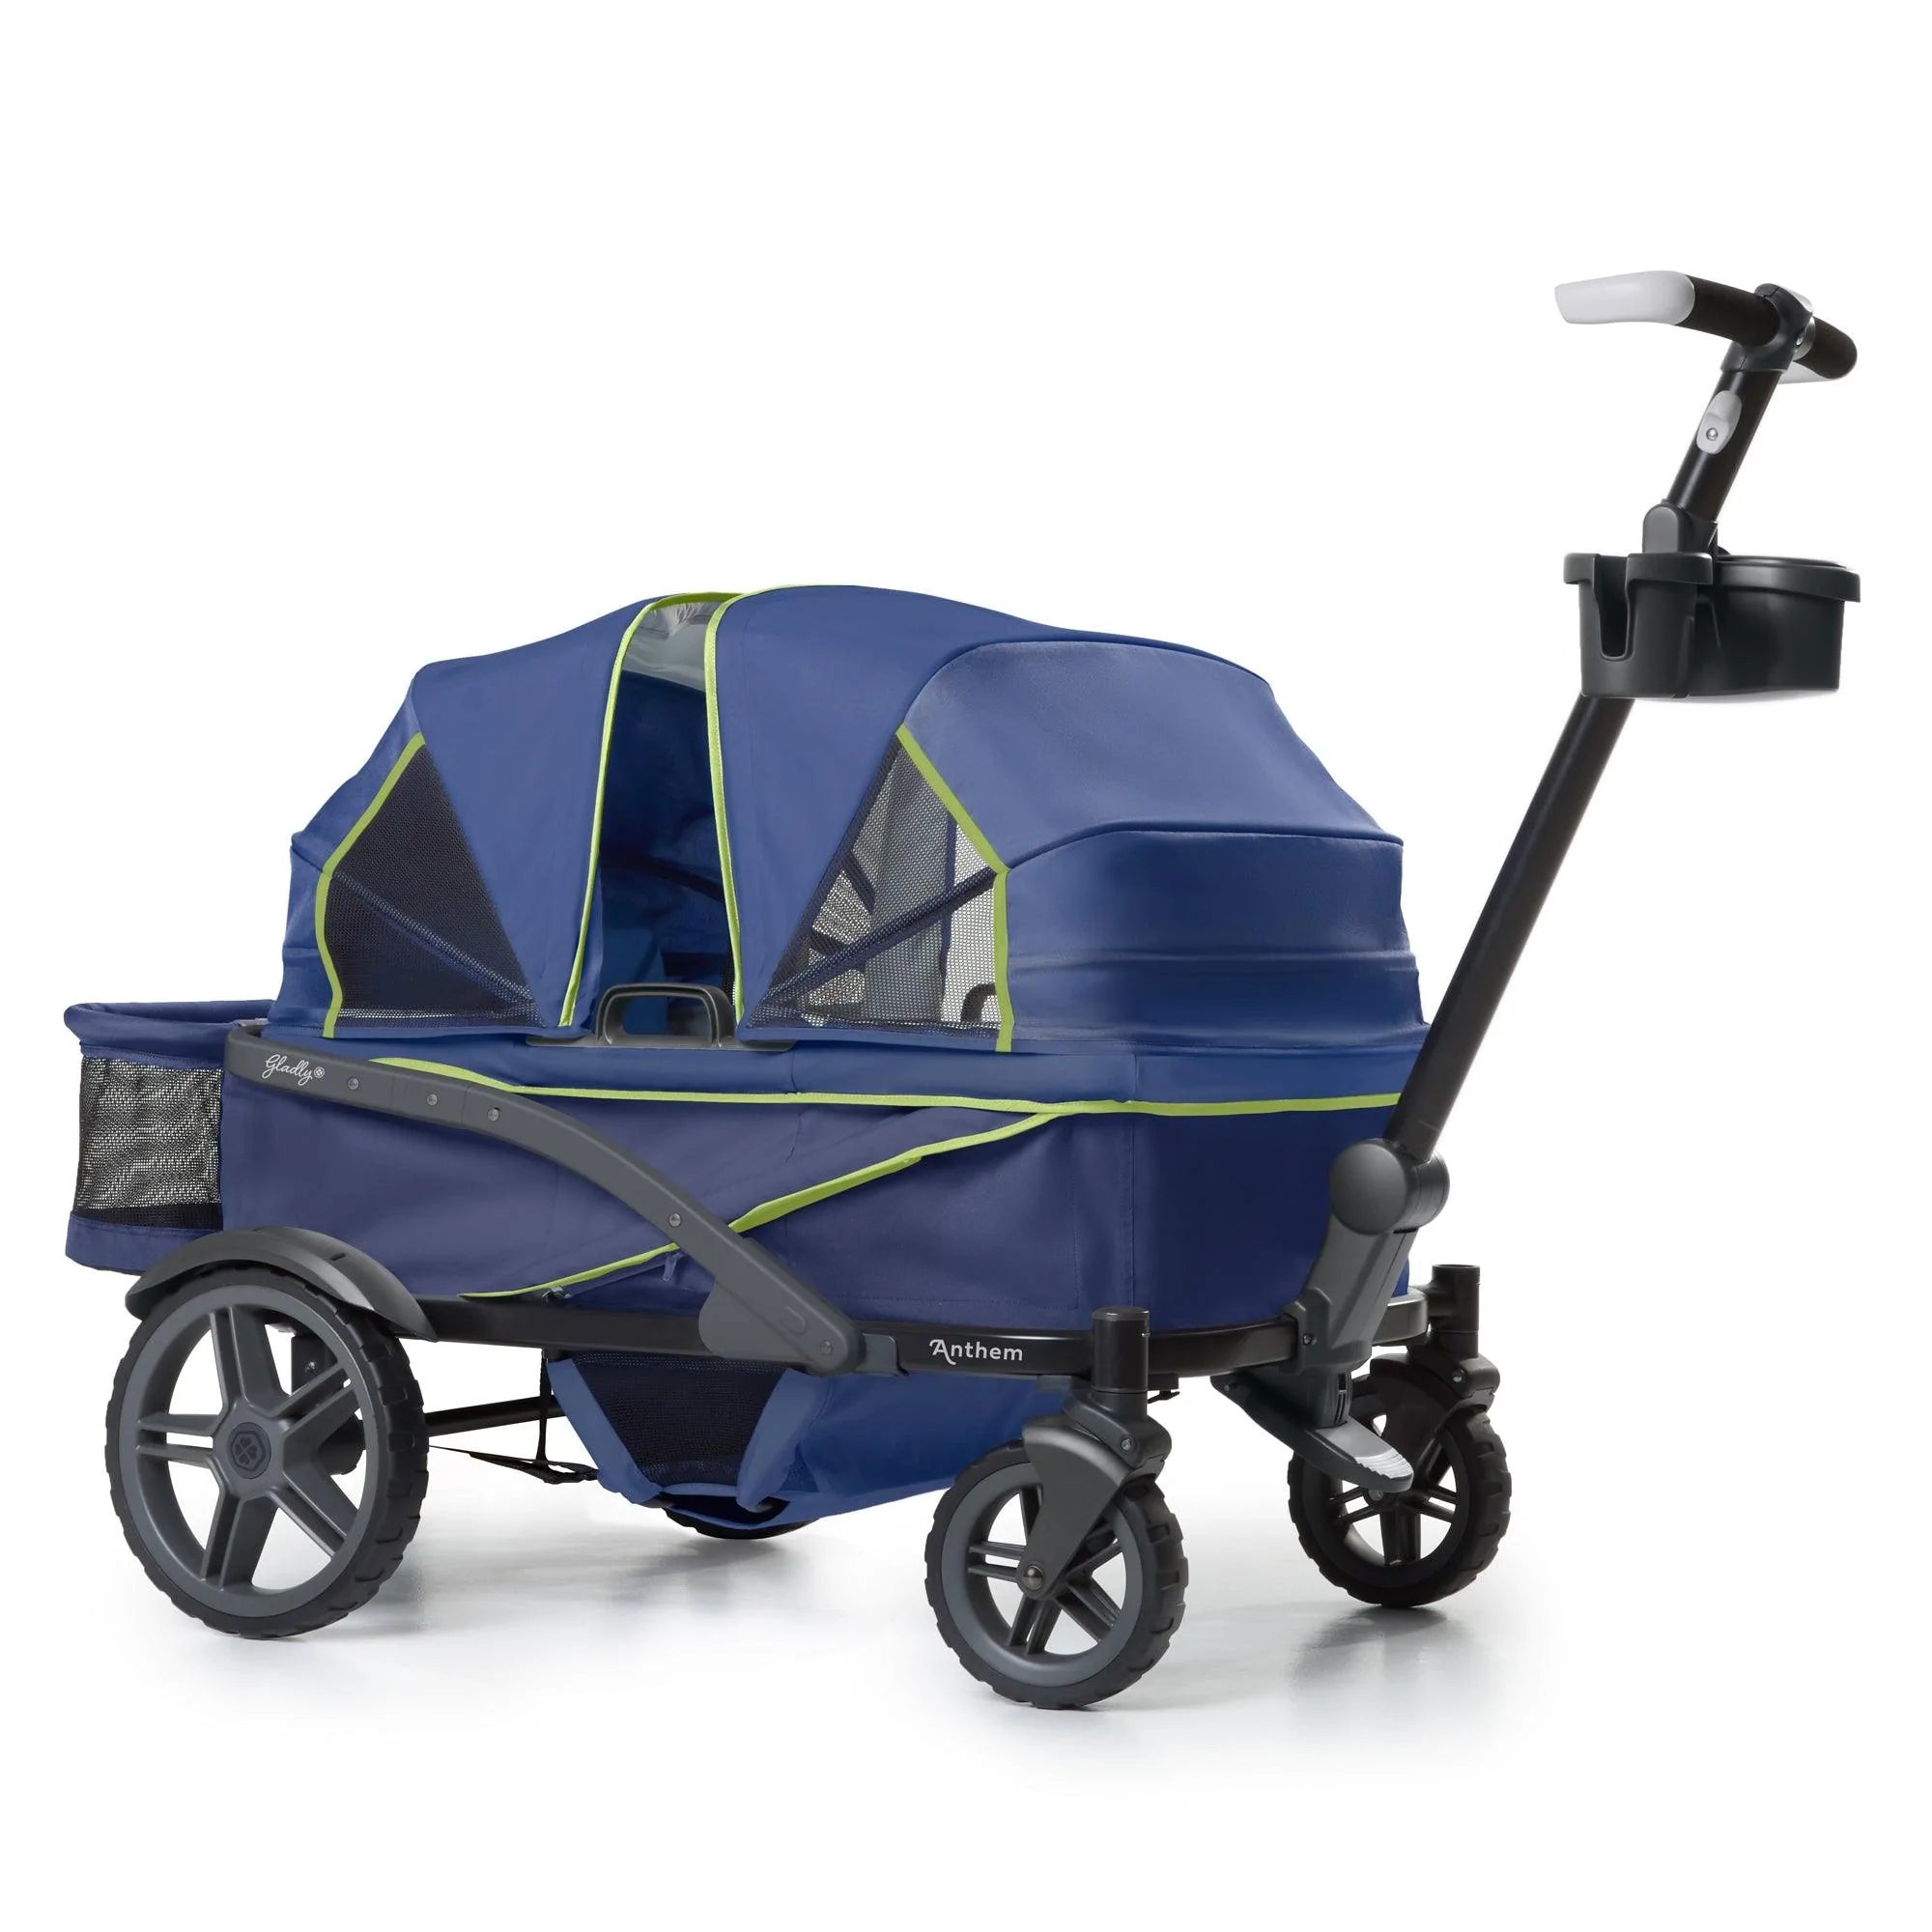 Gladly Family Anthem4 Classic 4 Seater All Terrain Wagon Stroller, Sand and Sea